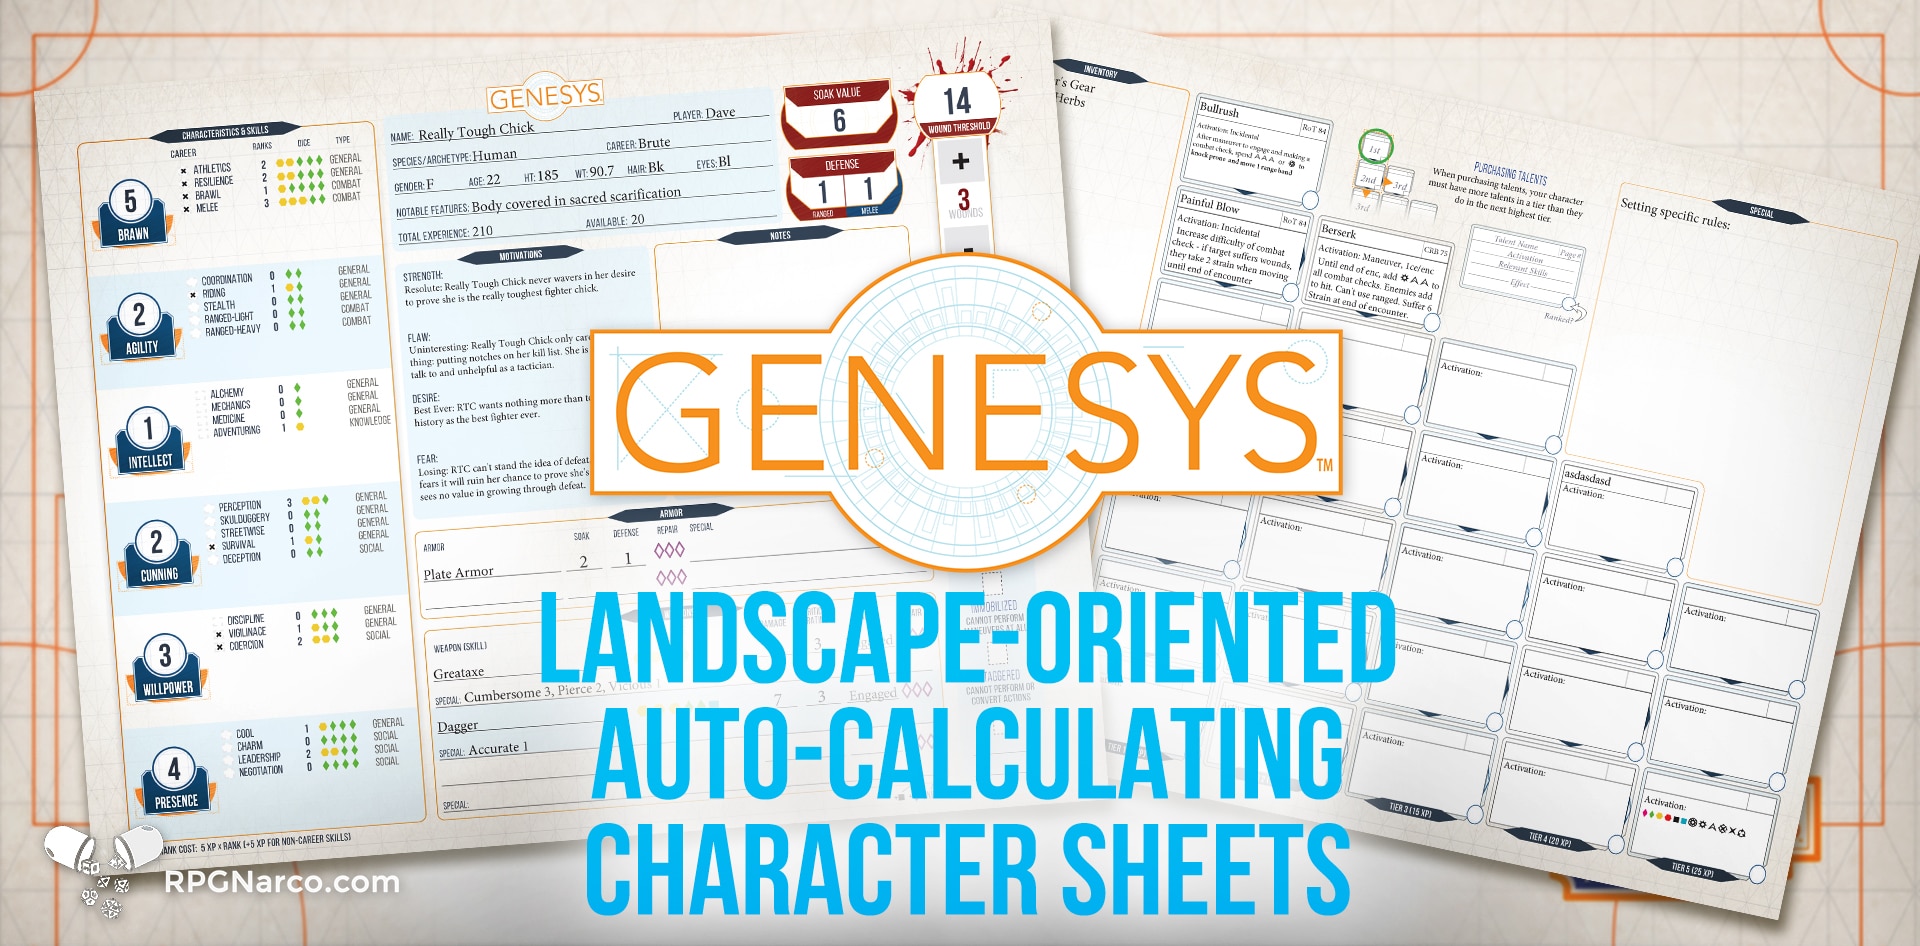 New Auto-calculating Character Sheet for Genesys